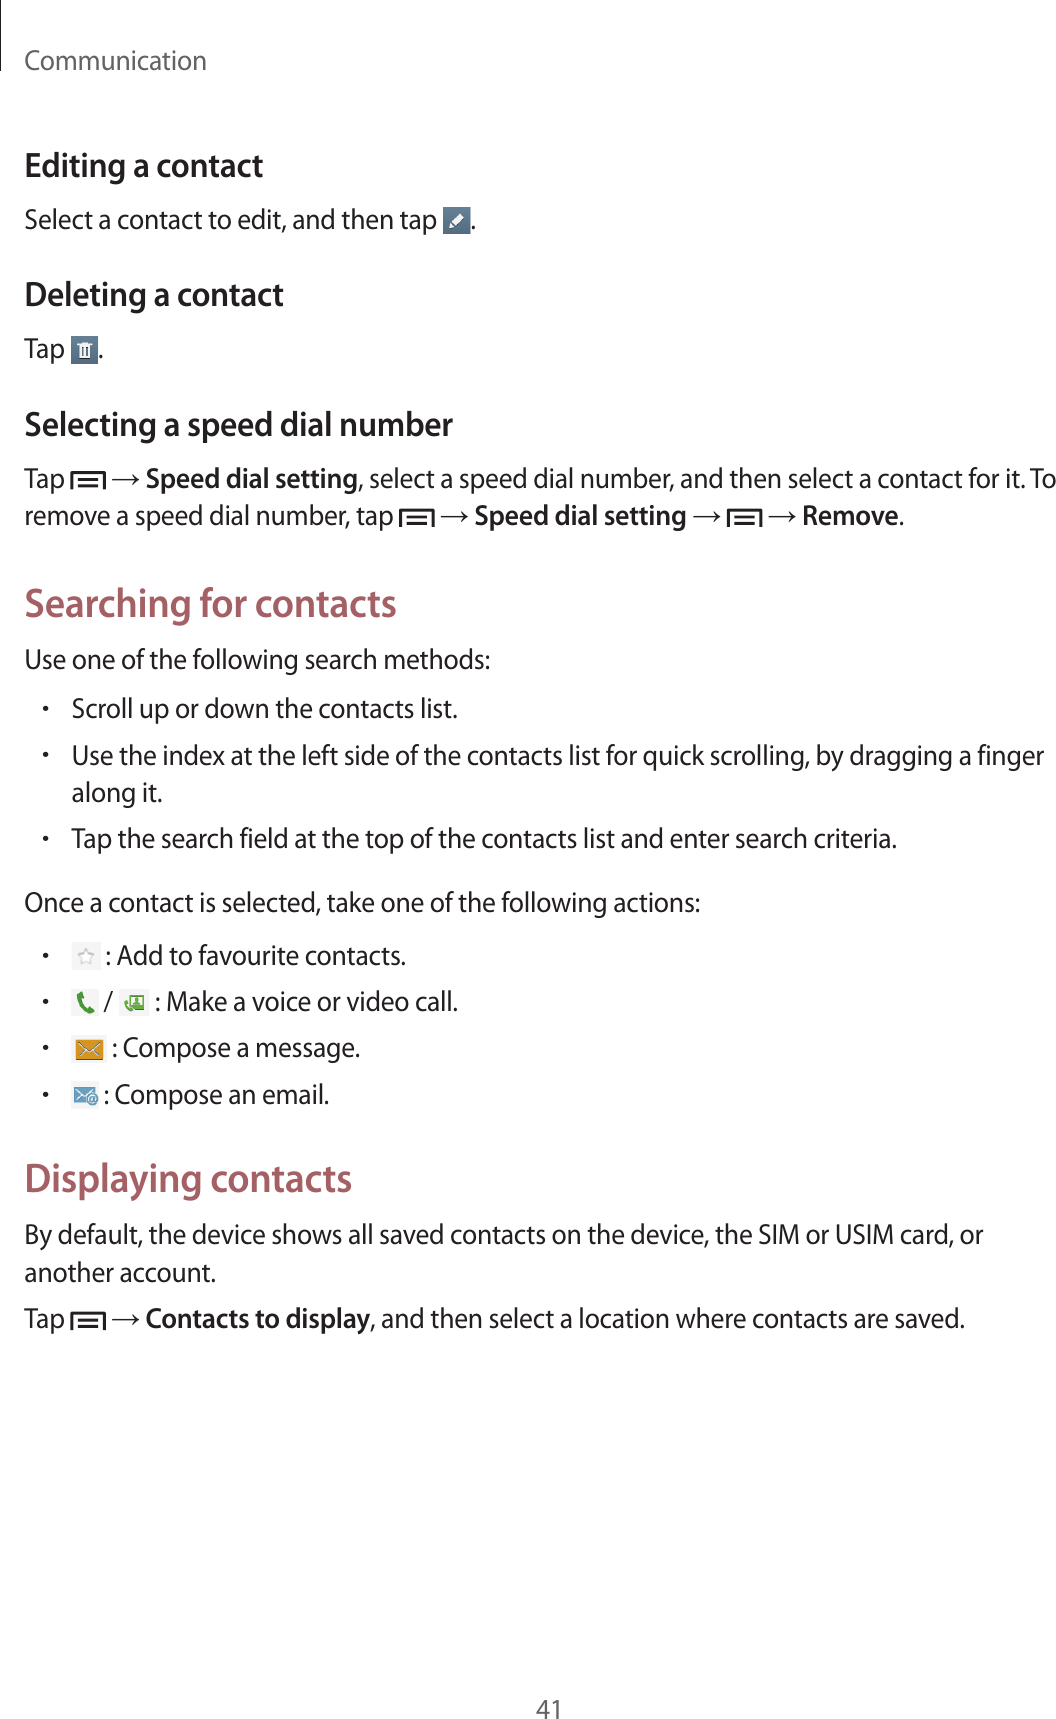 Communication41Editing a contactSelect a contact to edit, and then tap  .Deleting a contactTap  .Selecting a speed dial numberTap   → Speed dial setting, select a speed dial number, and then select a contact for it. To remove a speed dial number, tap   → Speed dial setting →   → Remove.Searching for contactsUse one of the following search methods:•Scroll up or down the contacts list.•Use the index at the left side of the contacts list for quick scrolling, by dragging a finger along it.•Tap the search field at the top of the contacts list and enter search criteria.Once a contact is selected, take one of the following actions:• : Add to favourite contacts.• /   : Make a voice or video call.• : Compose a message.• : Compose an email.Displaying contactsBy default, the device shows all saved contacts on the device, the SIM or USIM card, or another account.Tap   → Contacts to display, and then select a location where contacts are saved.